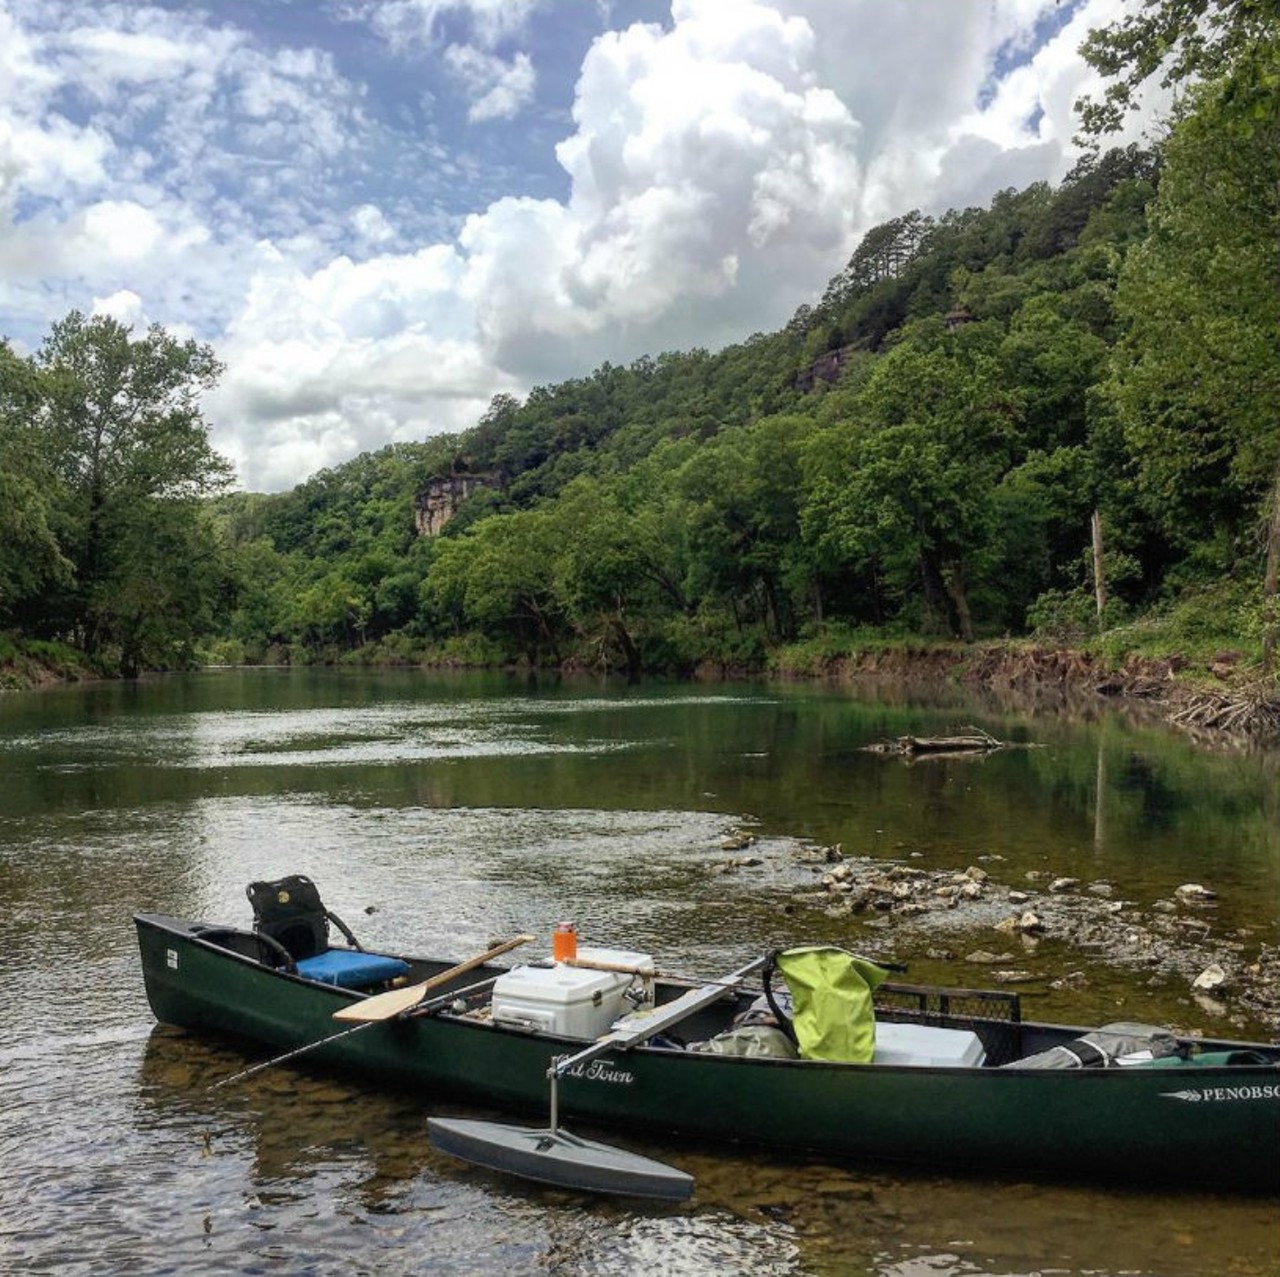 Big Piney River
Texas, Howell, Phelps and Pulaski County, MO
The biggest tributary of the Gasconade River, the Big Piney is a great place for fishing. In the upper and middle reaches you'll also have a great view, with limestone bluffs topped with pine trees. Photo courtesy of Instagram / kbarncord.